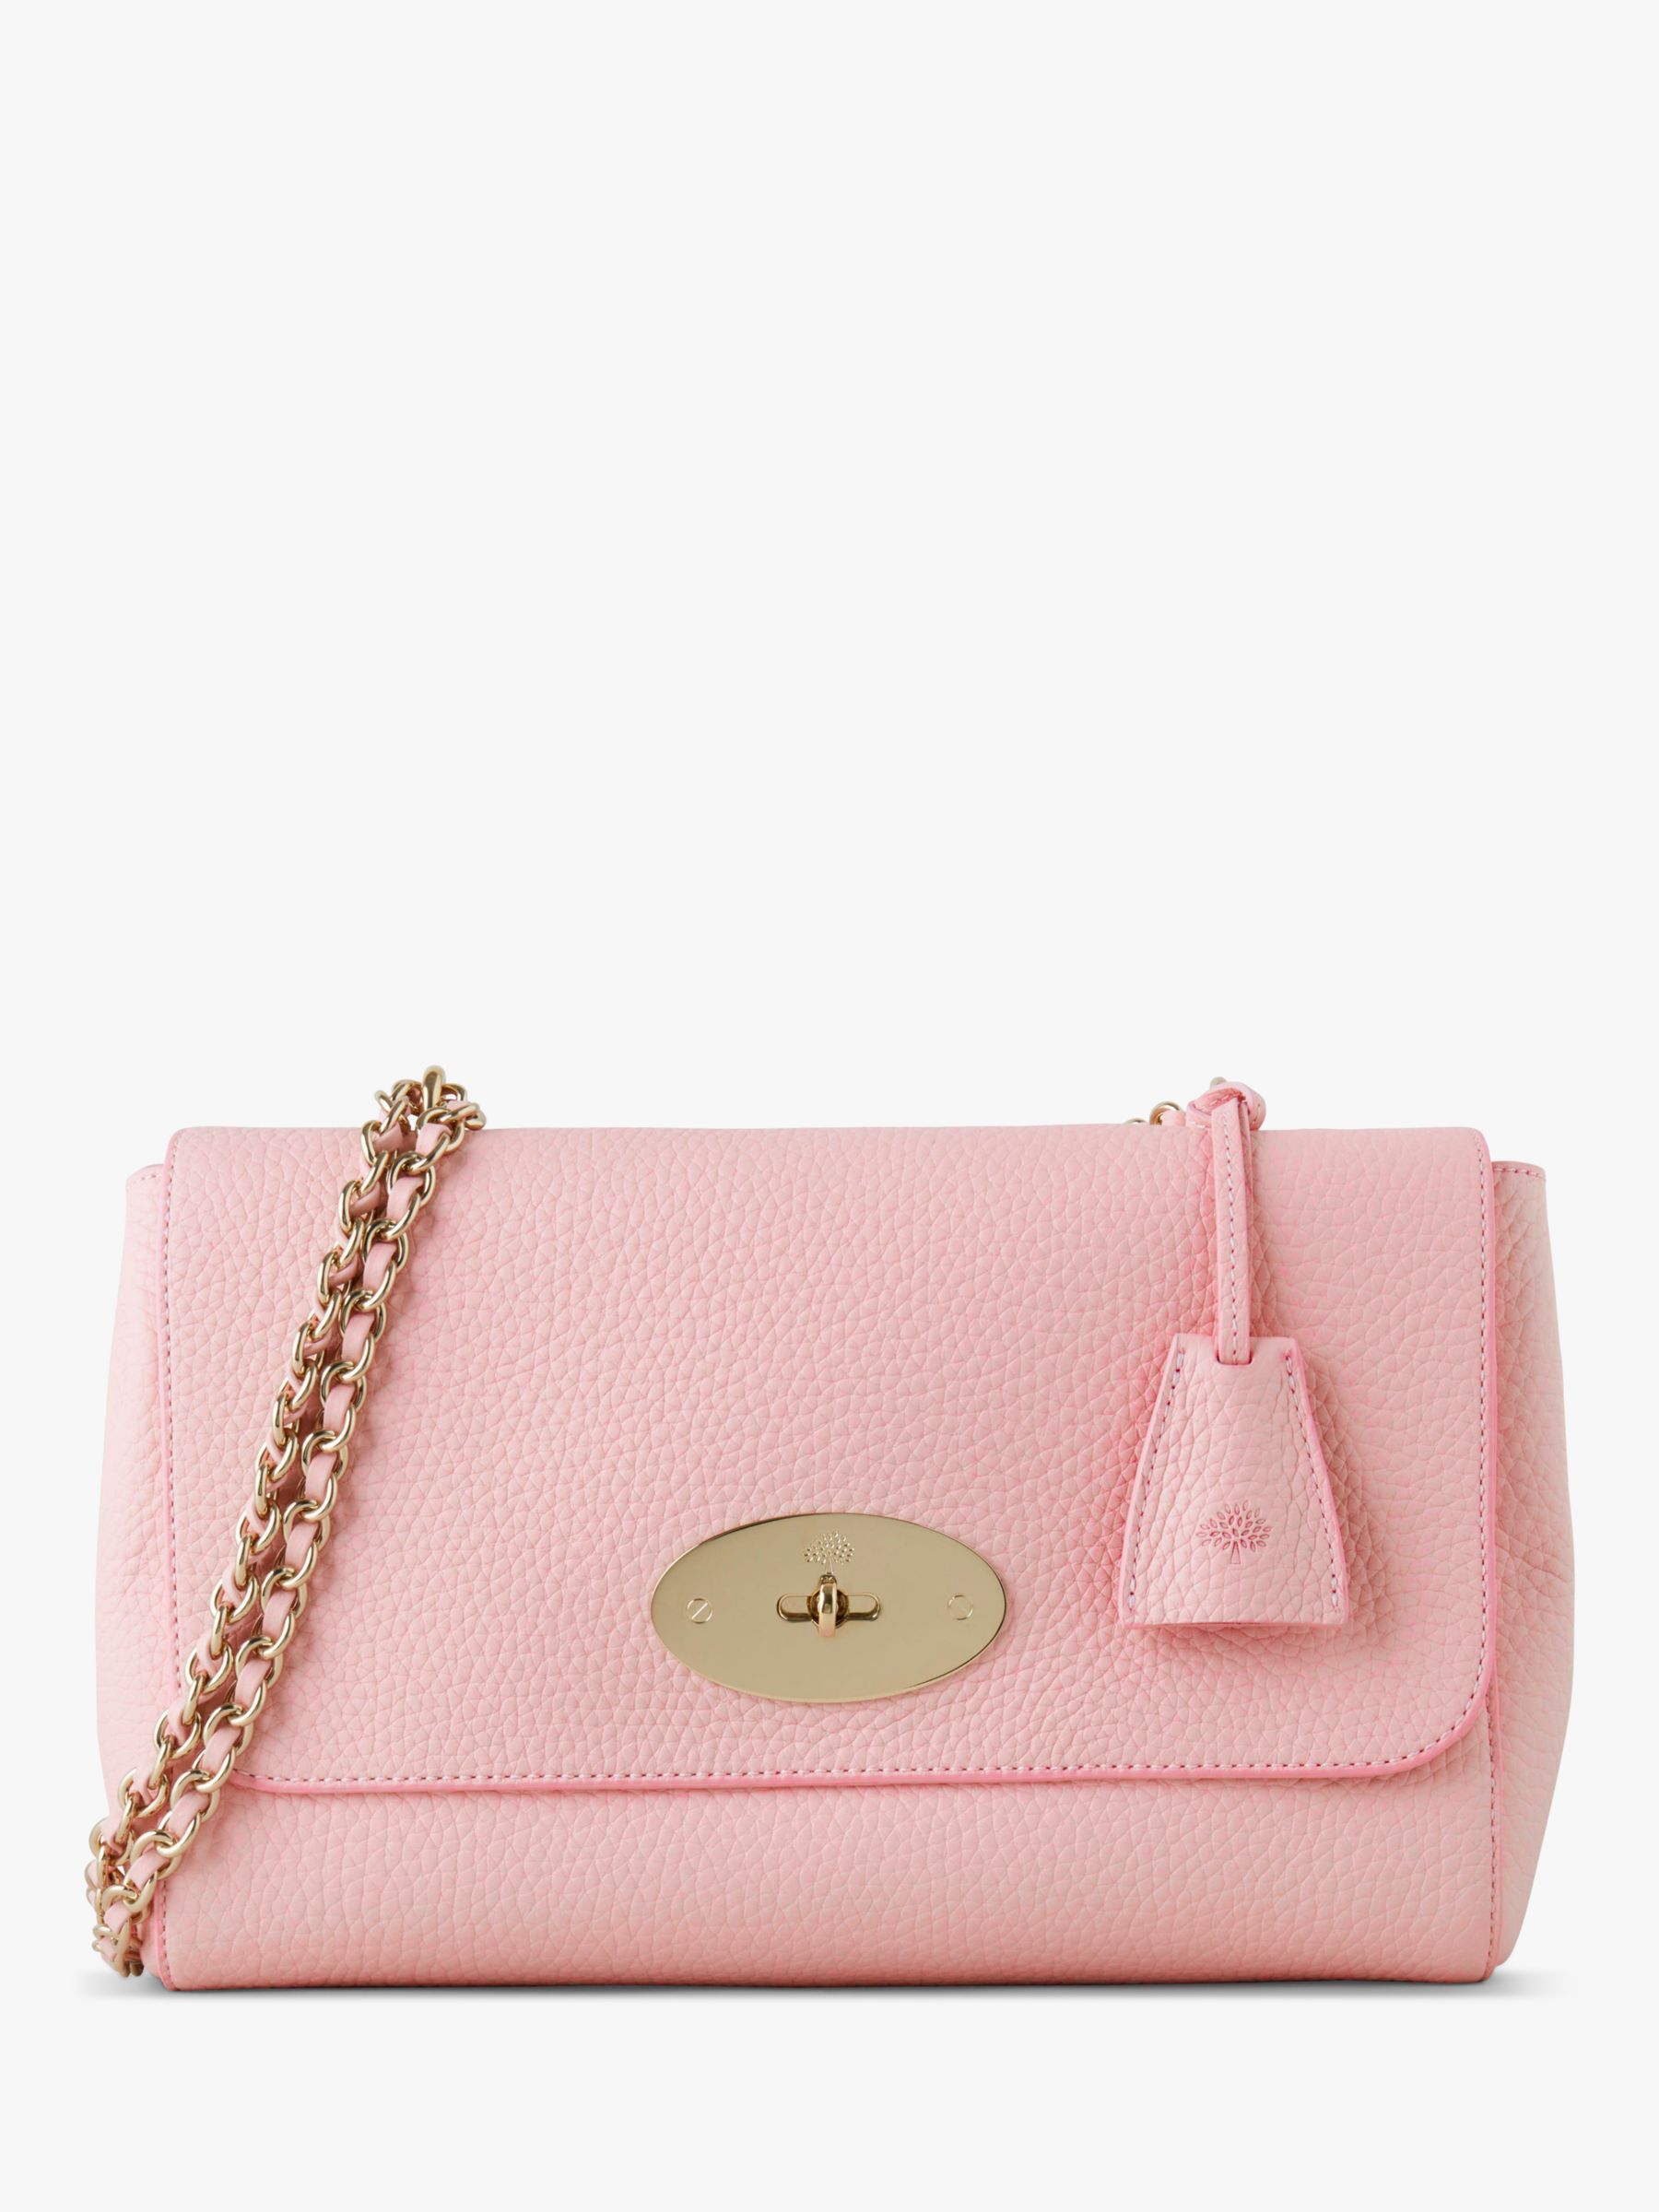 Mulberry Medium Lily Heavy Grain Leather Shoulder Bag, Powder Rose at ...